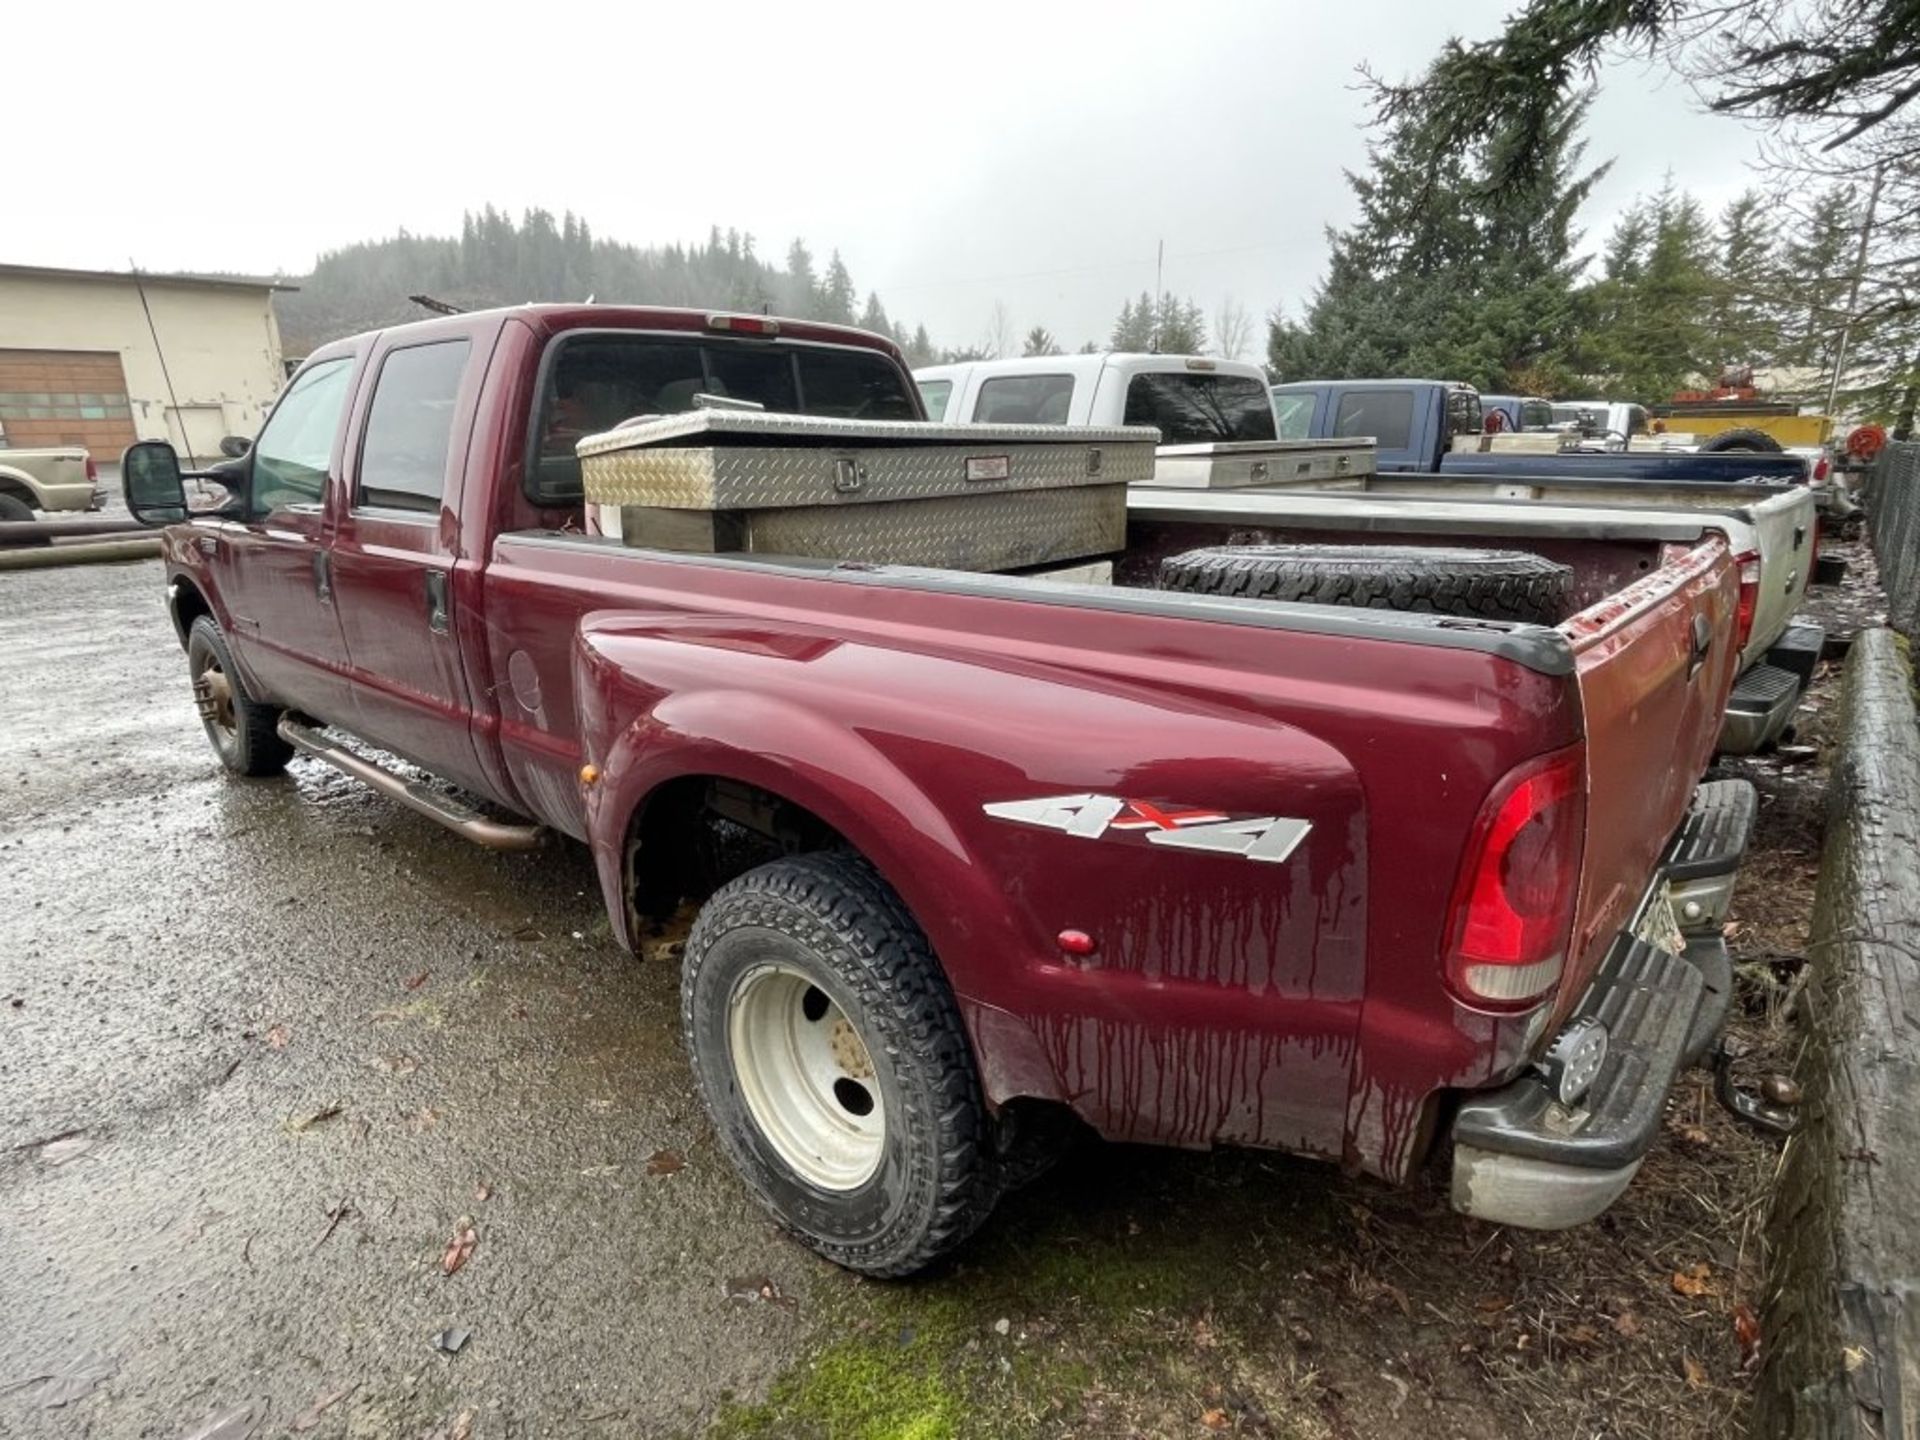 1999 Ford F350 XLT SD 4x4 Crew Cab Pickup - Image 4 of 17